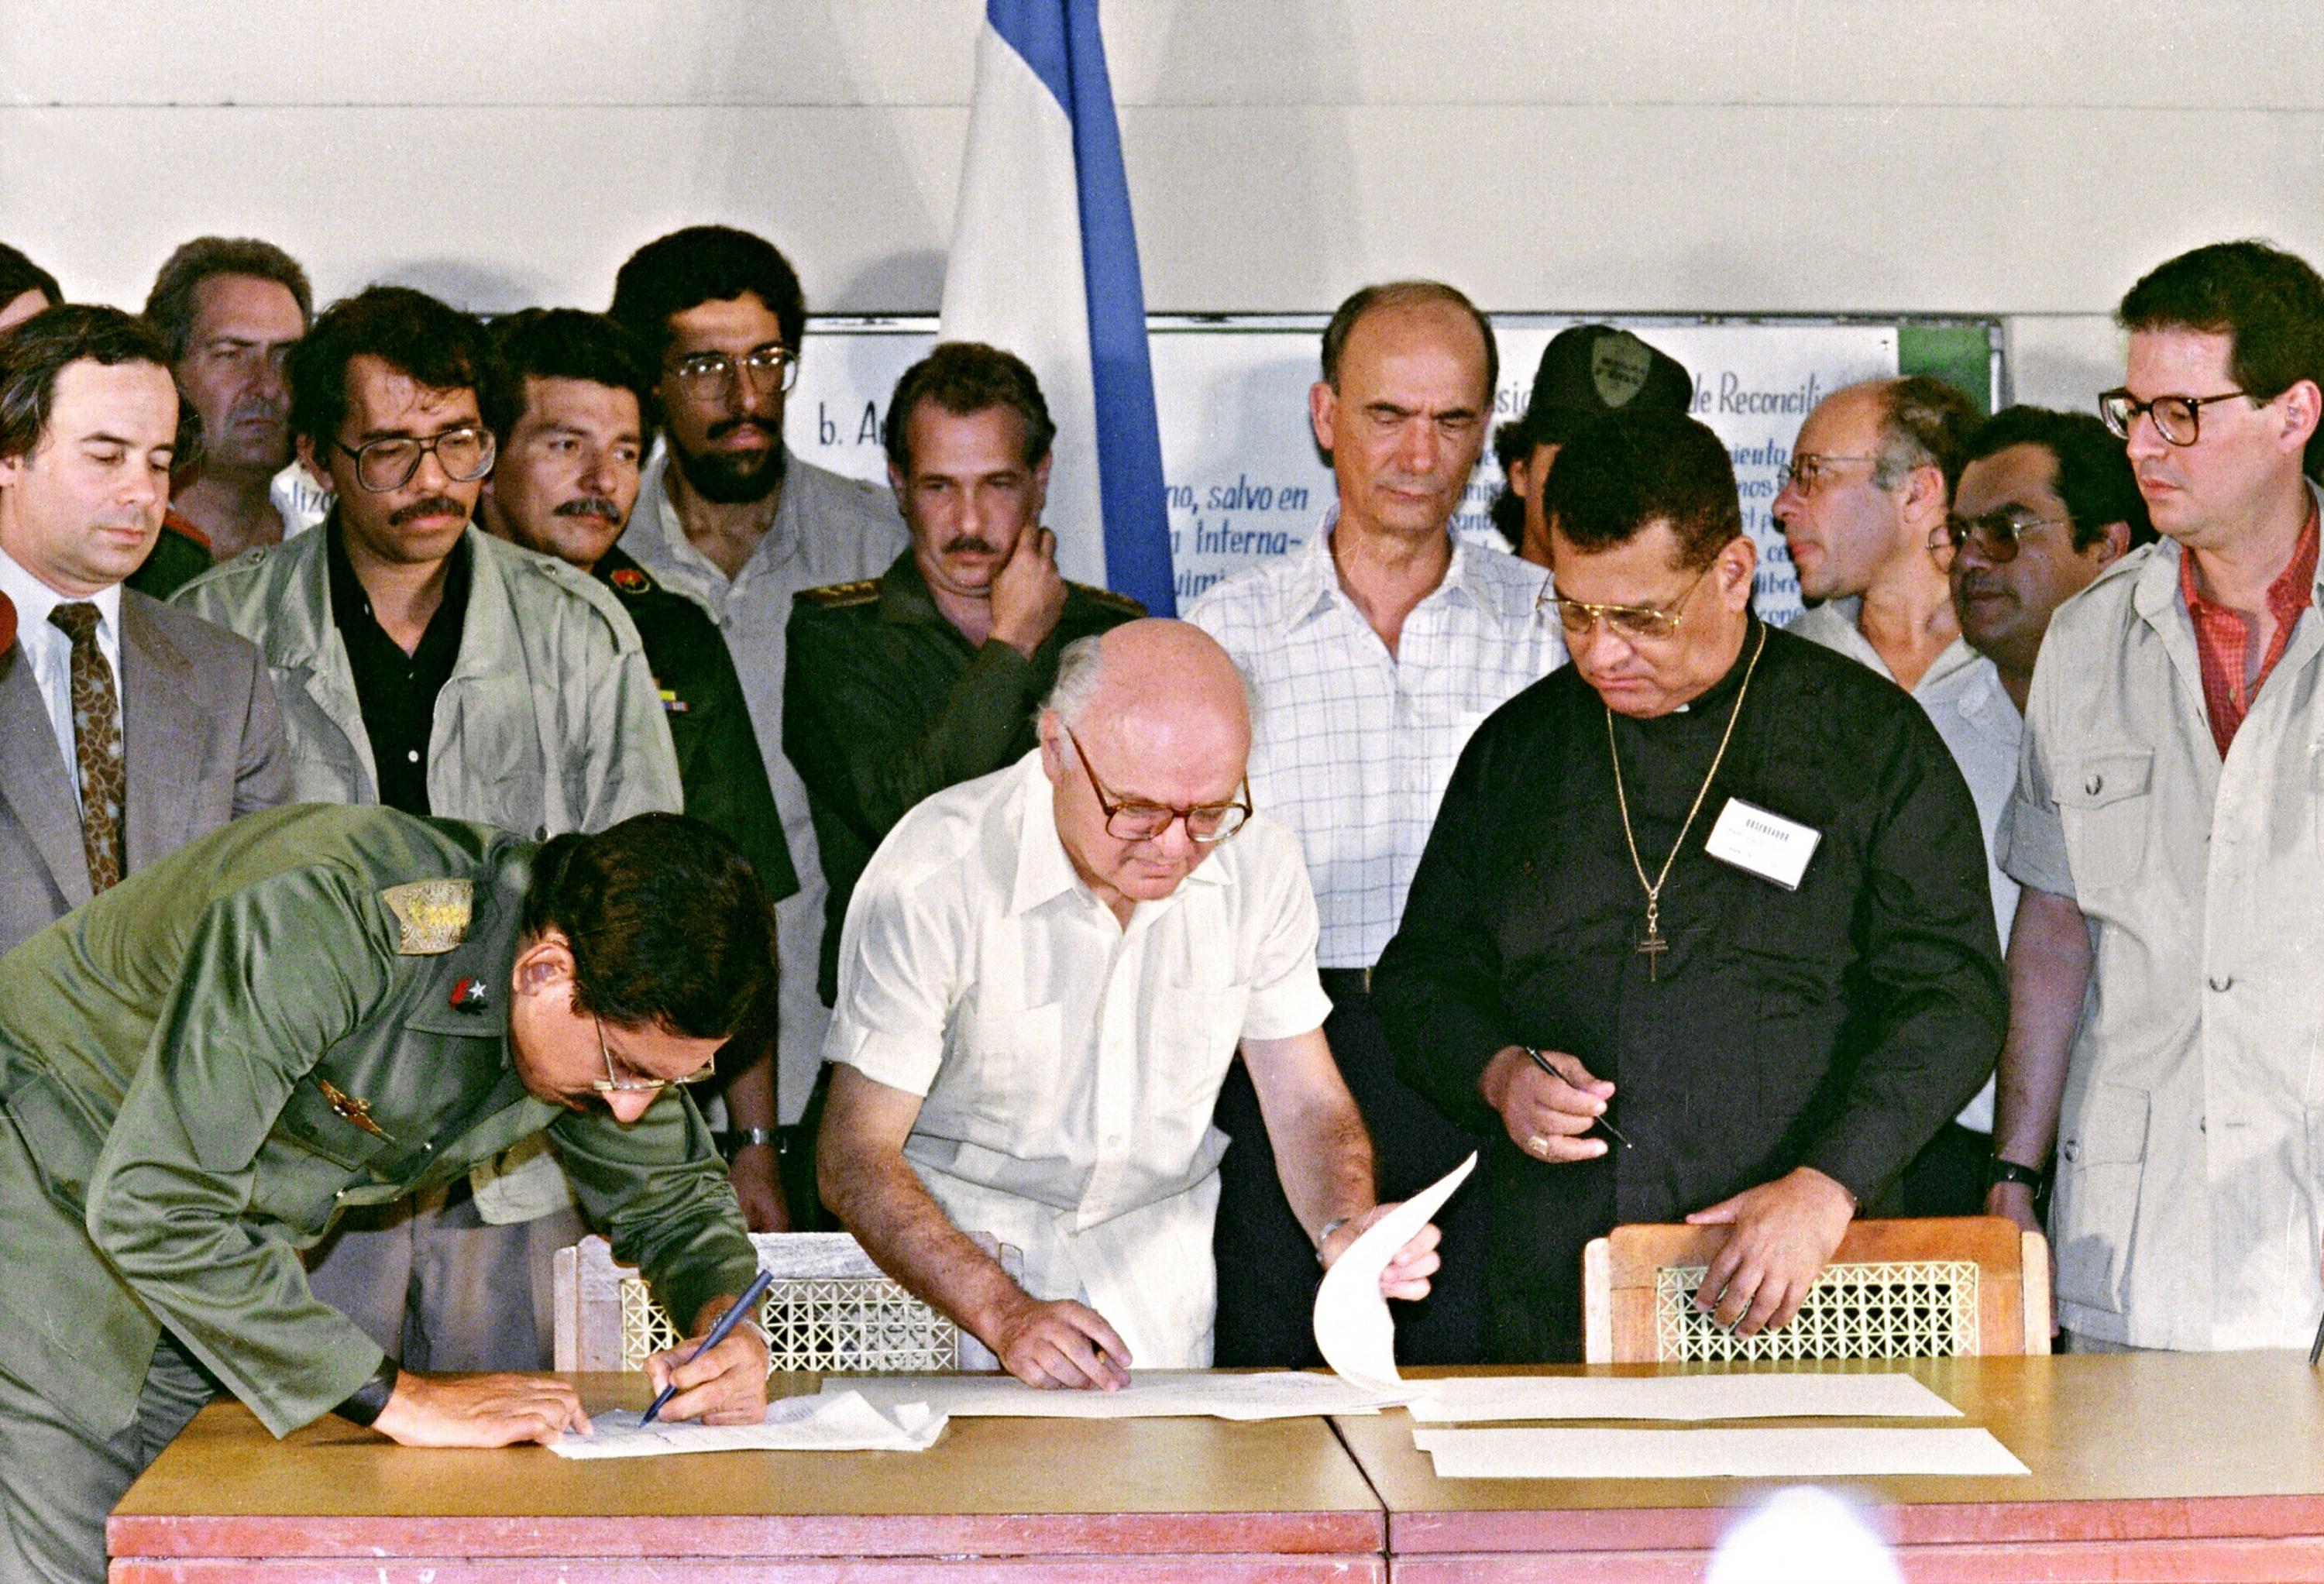 Nicaraguan Defense Minister Humberto Ortega (left) signs a cease-fire agreement with contra rebels on March 23, 1988, in Sapoa. L-to-R Nicaraguan President Daniel Ortega (with spectacles), Joao Baena Soares, general secretary of the Organization of American States, Cardinal Miguel Obando y Bravo, and Alfredo César, director of the Nicaraguan Resistance (NR). Photo Manoocher Degathi/AFP